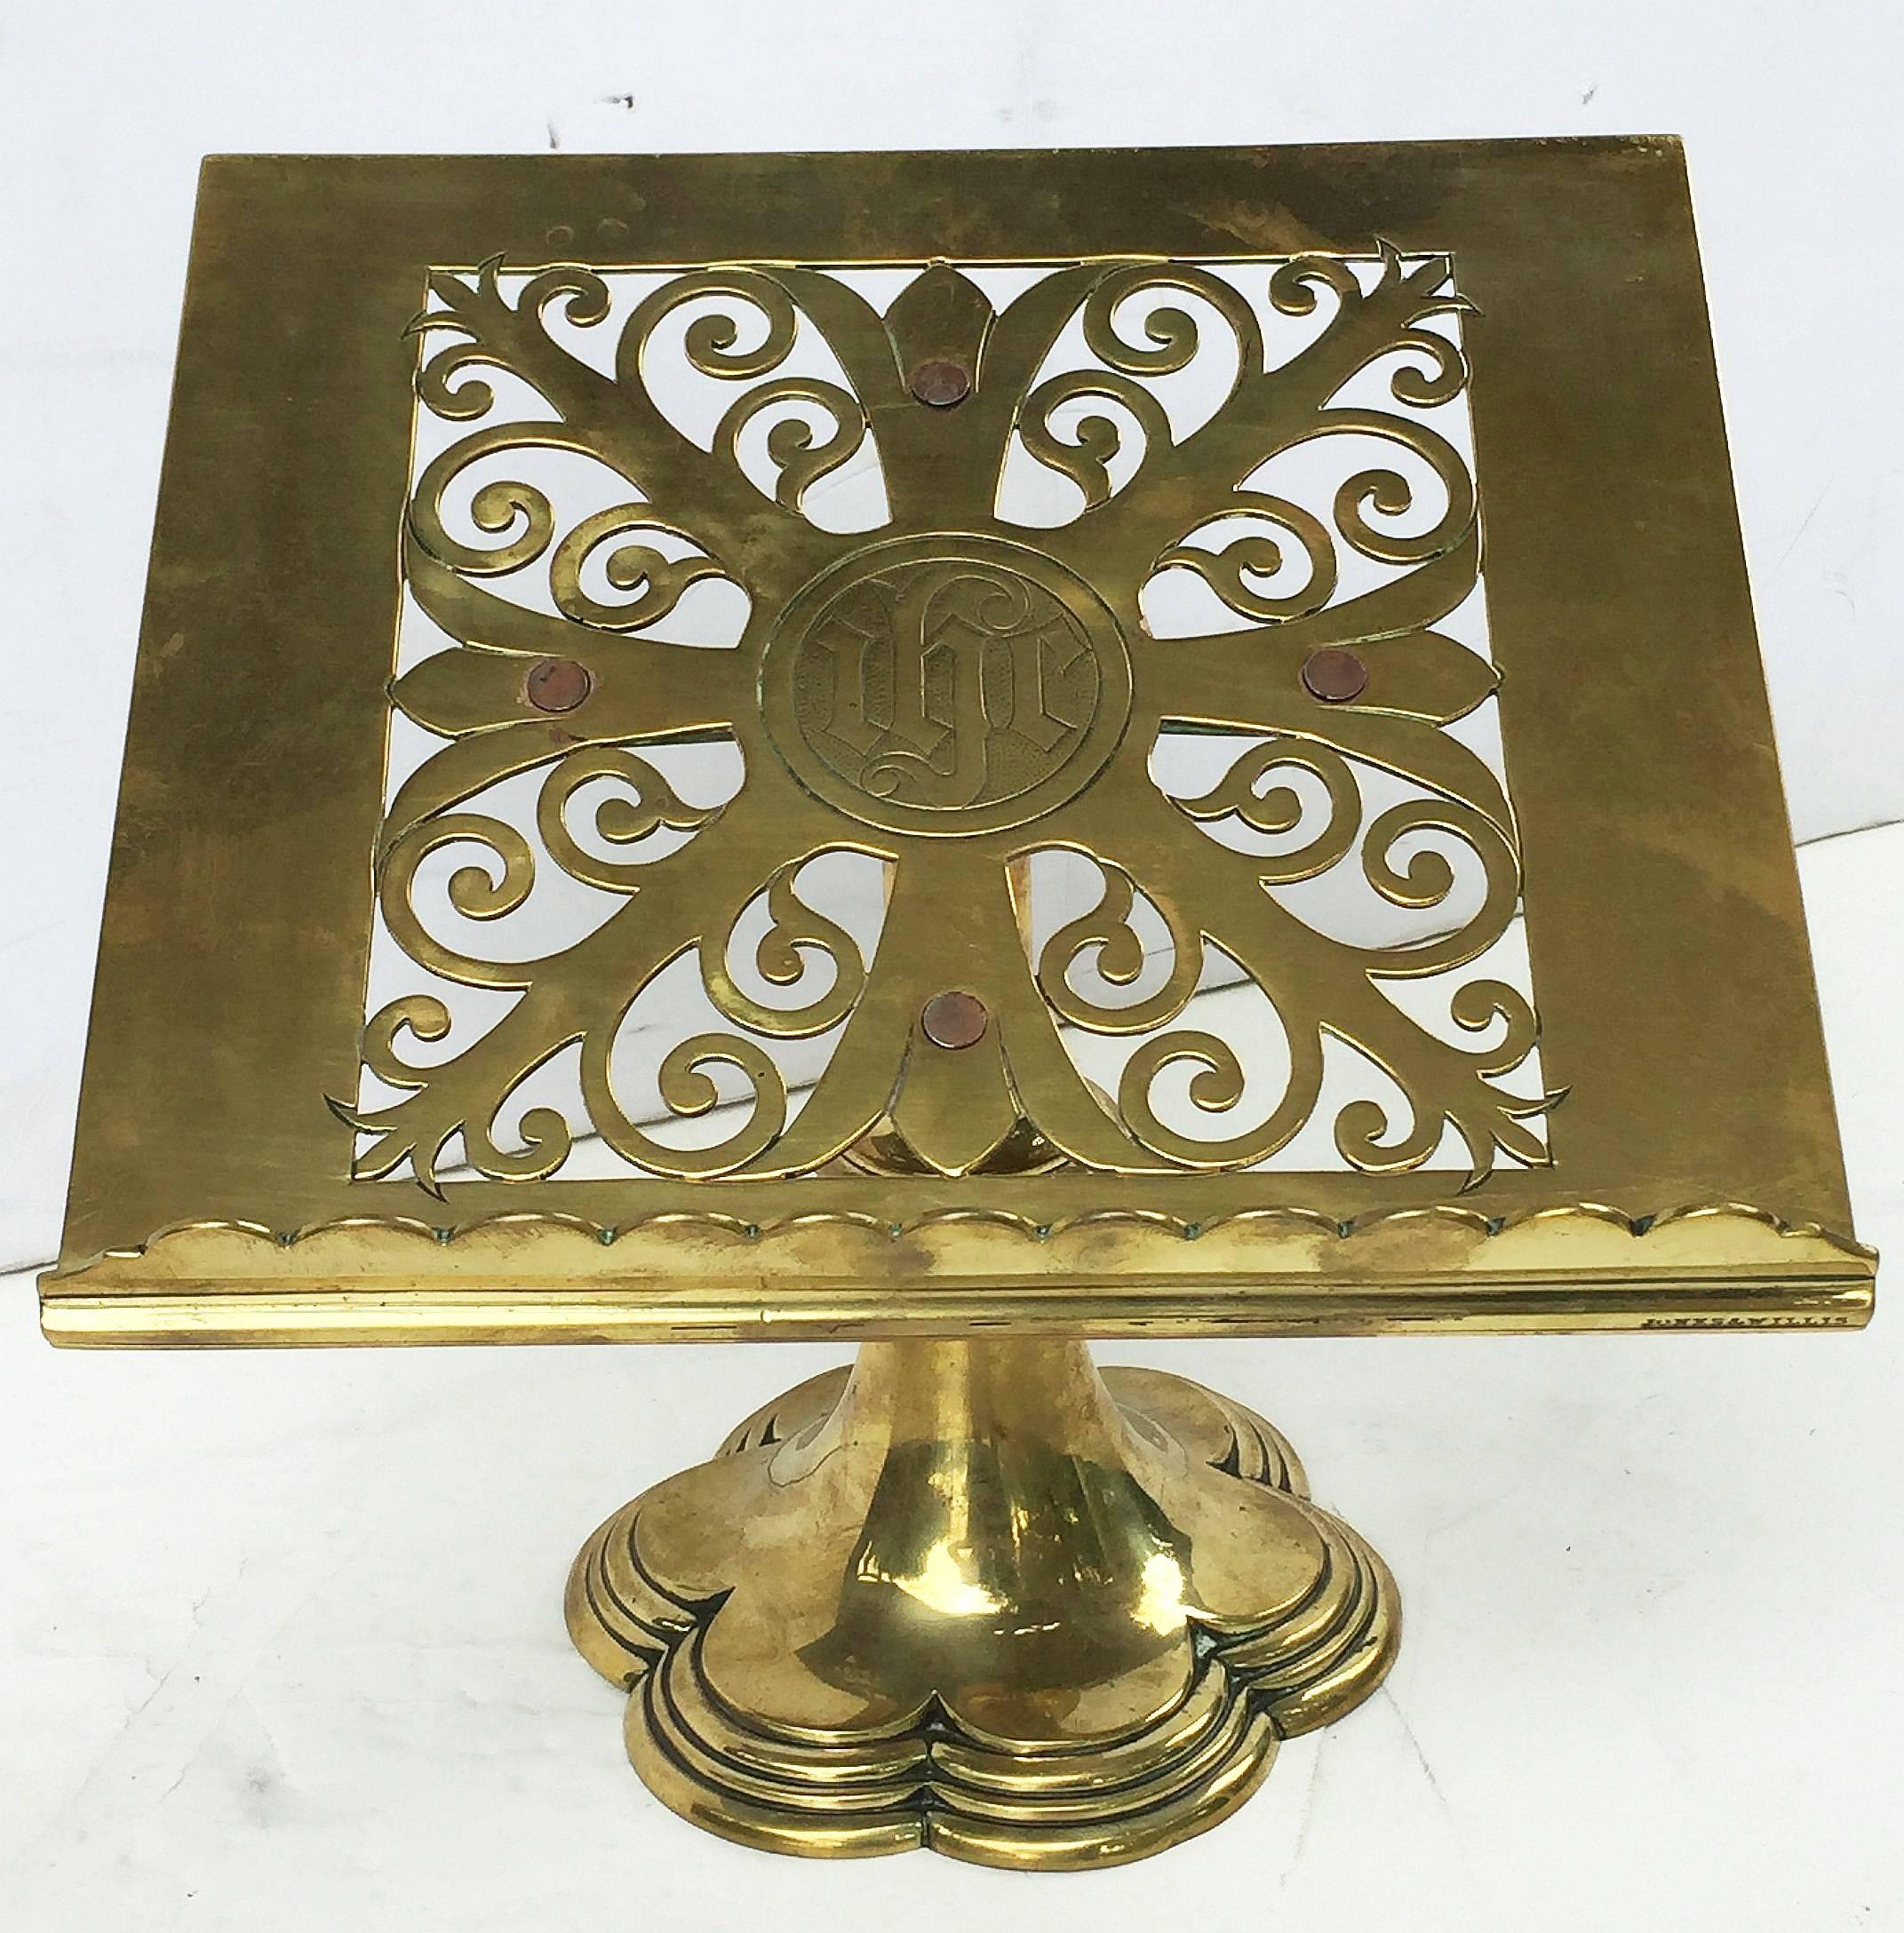 A fine English table top lectern, missal or book stand of brass, featuring a Christian symbol or Christogram in the center reading IHC here deriving from the Greek word for Christ. The top attached to a weighted base.

Marked on base edge Jones &